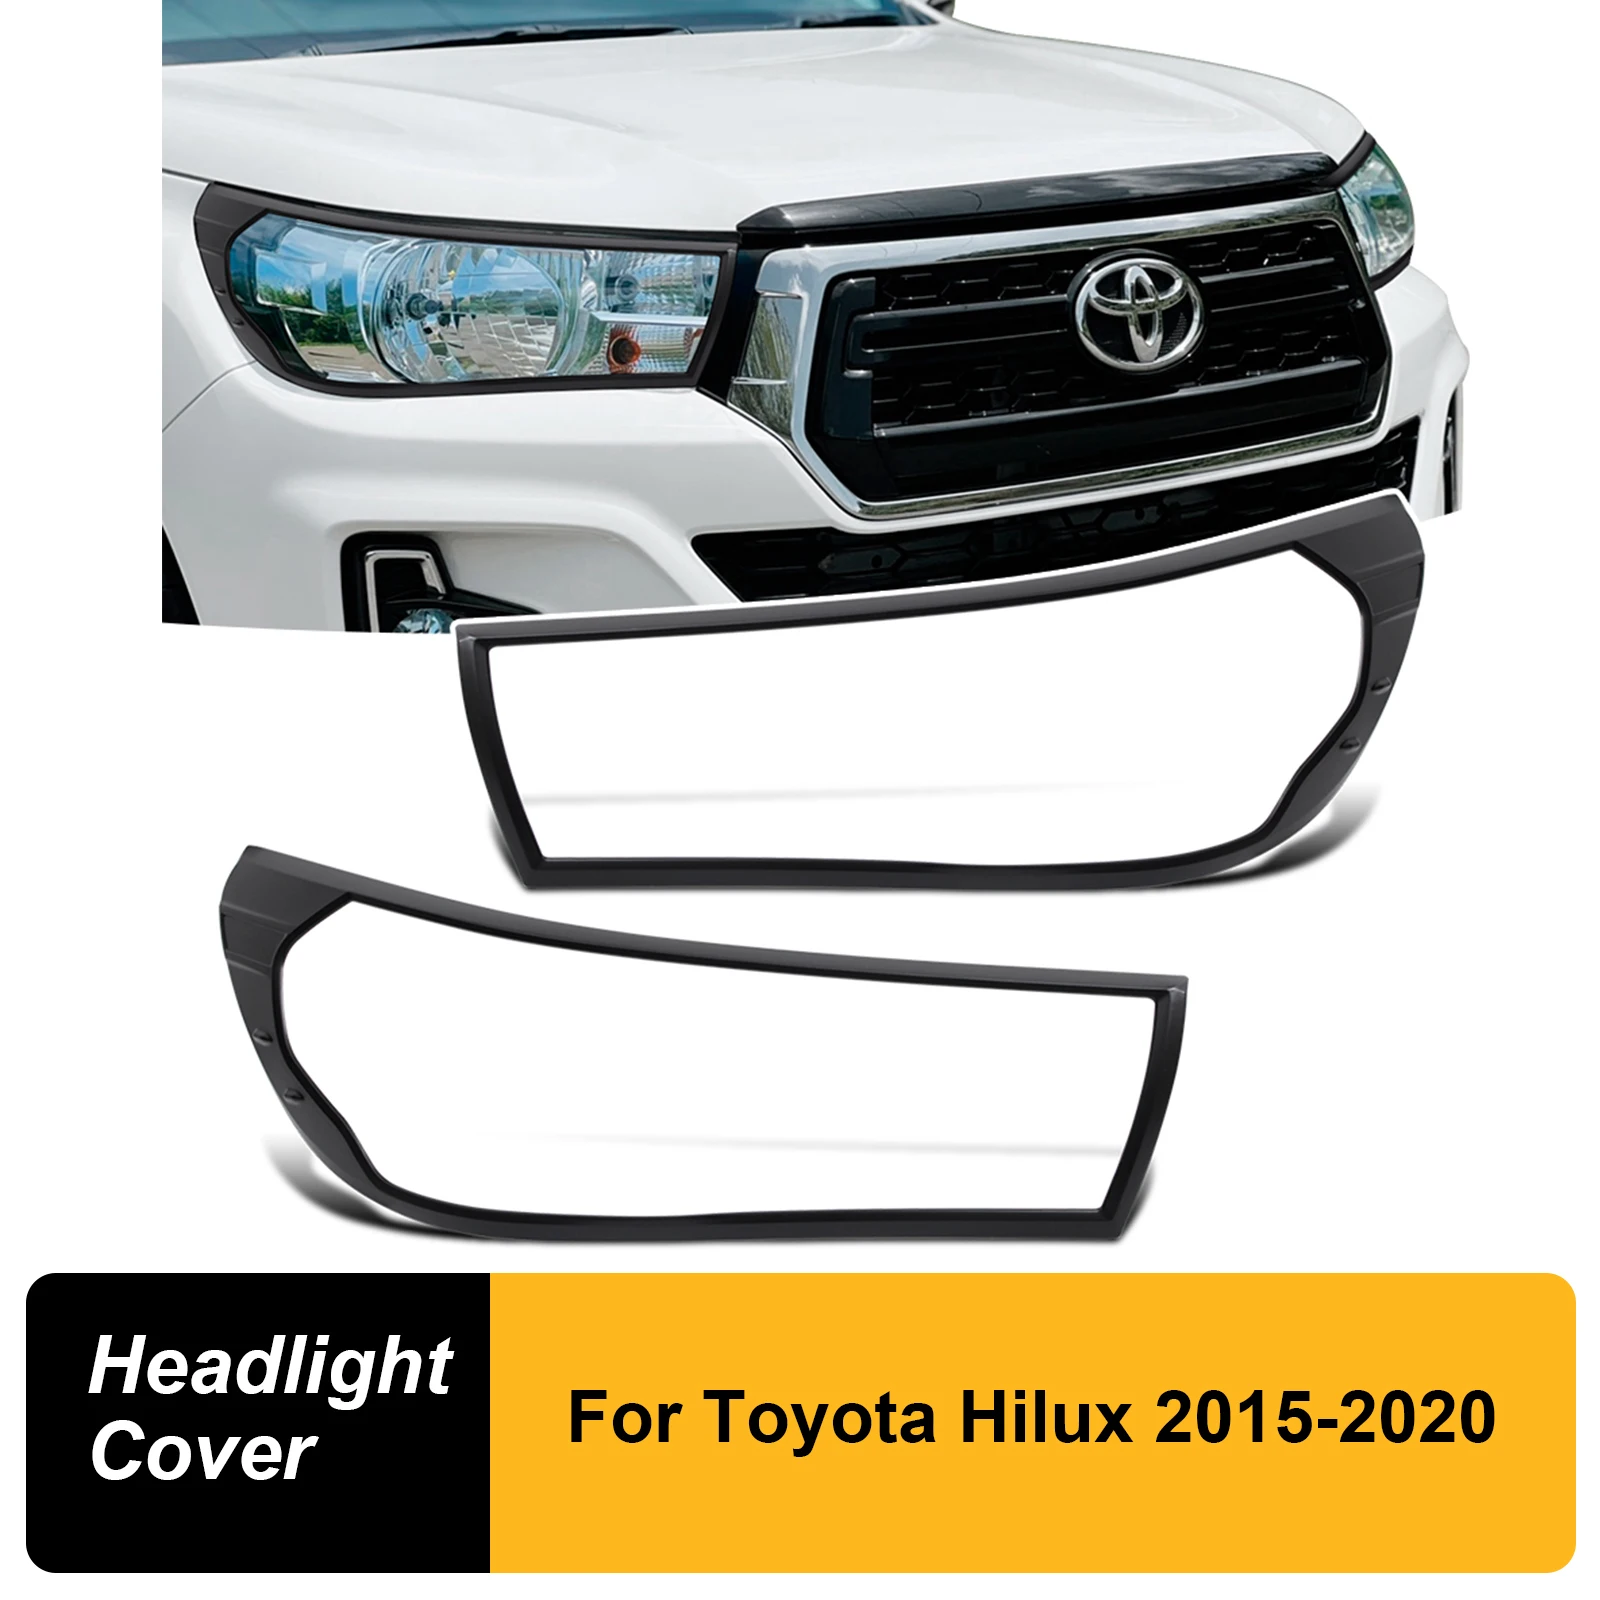 

2pcs/set Headlight Cover Trim For Toyota Hilux Revo 2015 2016 2017 2018 2019 2020 year Models Front Light Cover 4X4 Car Styling